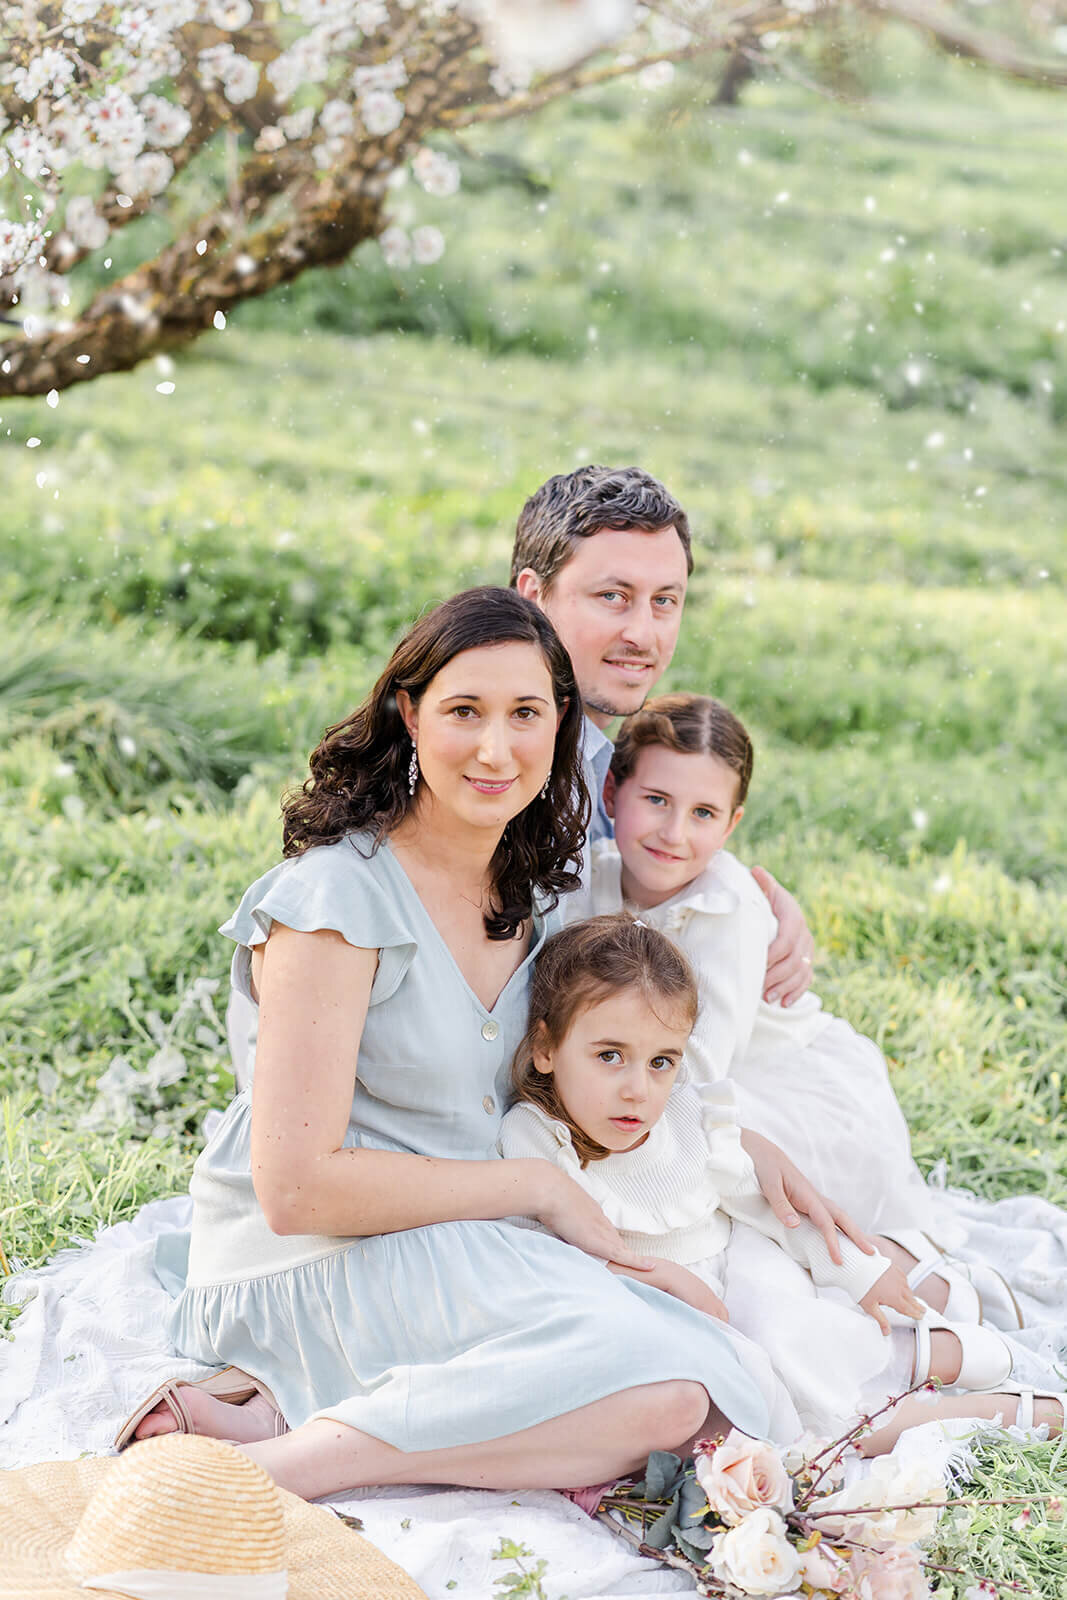 Serene, relaxed family portrait of a young family in Brisbane's plum blossom orchard.